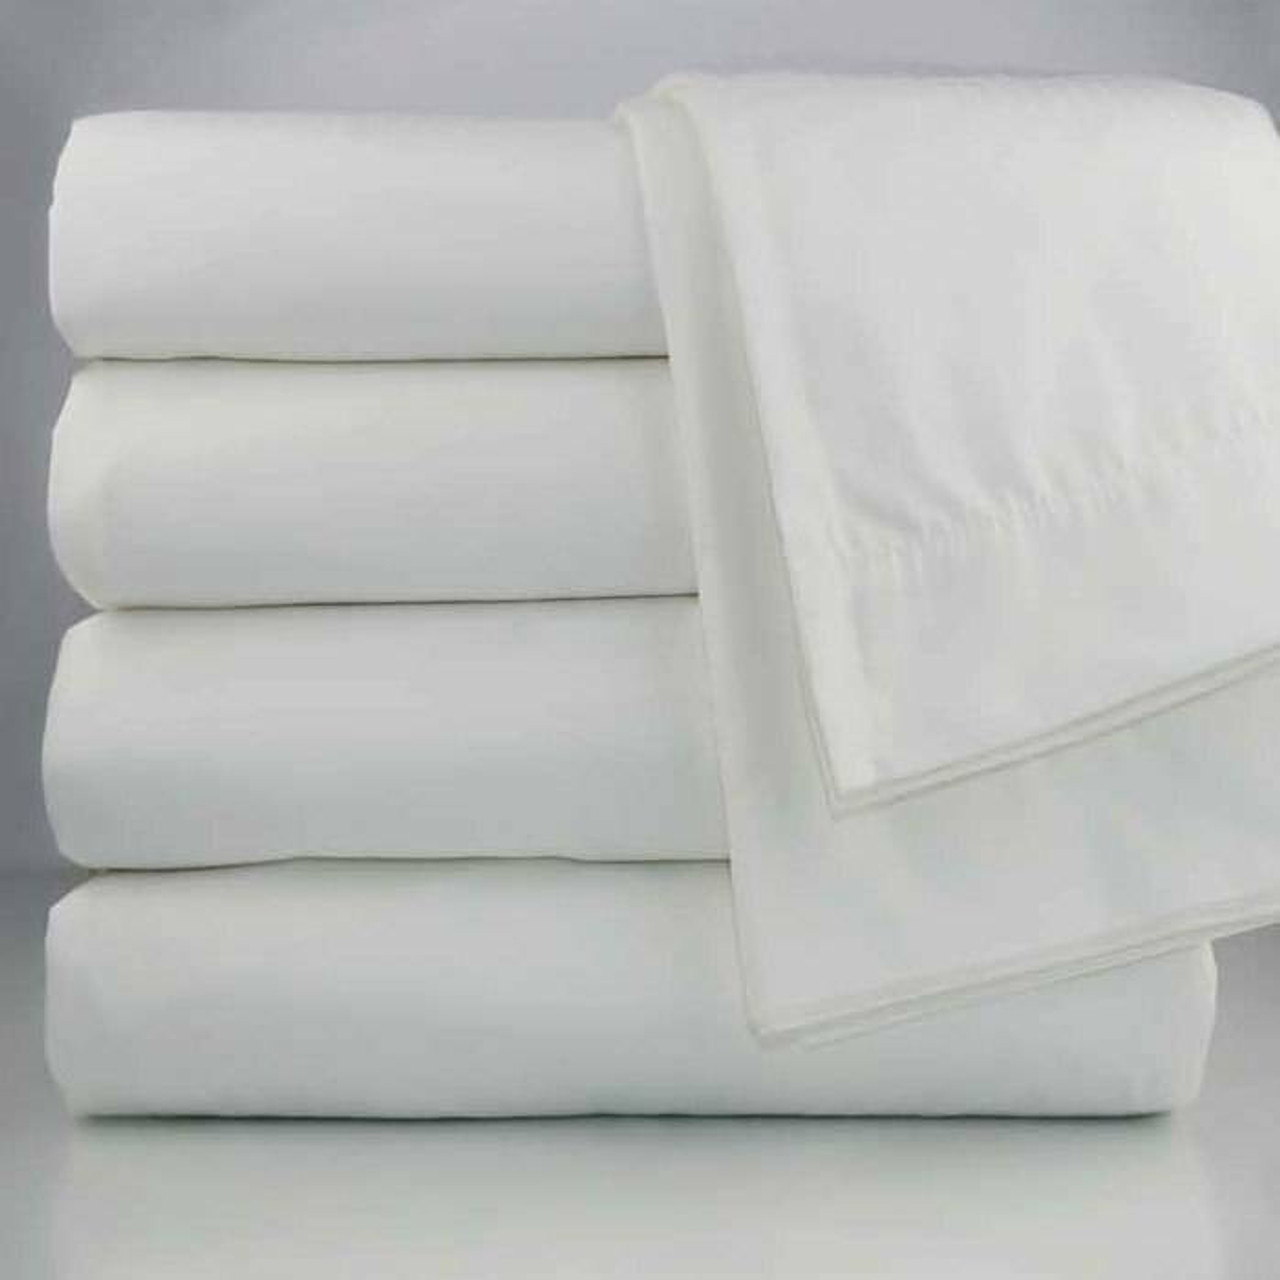 Ganesh Mills or Oxford Super Blend Oxford T250 Satin Bed Sheets by Ganesh Mills - All Sizes and Styles